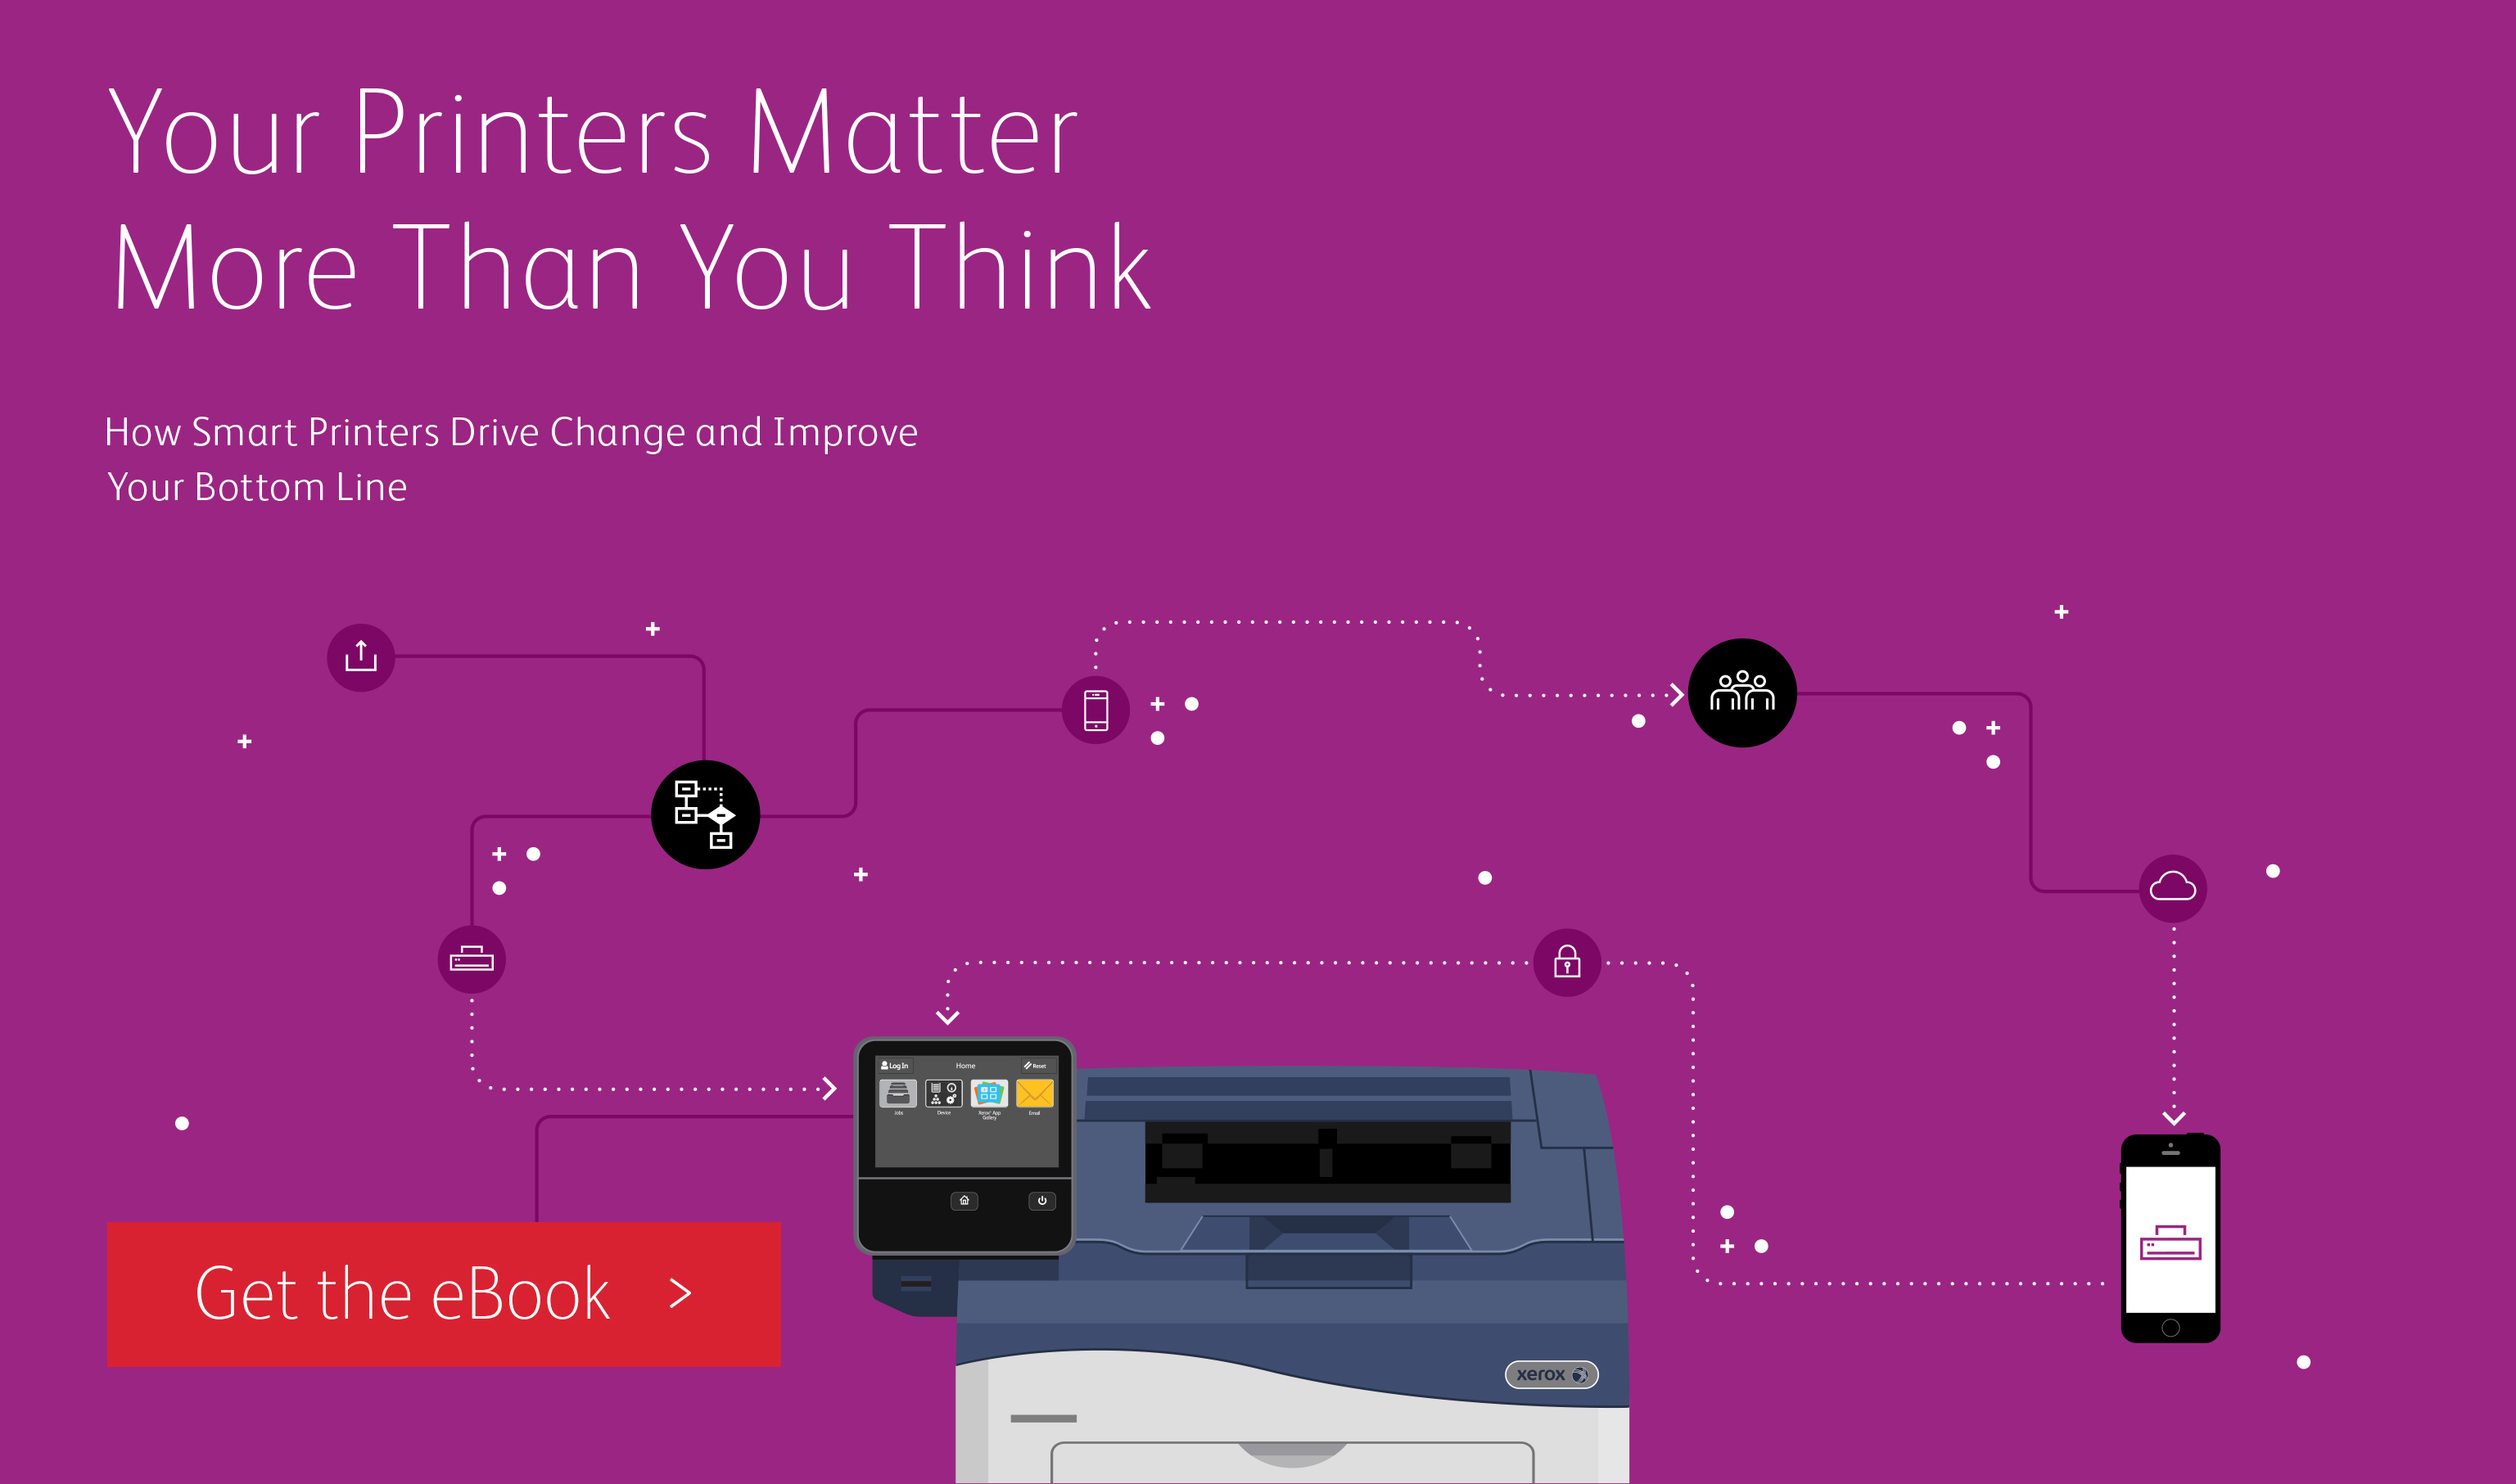 Download the free eBook on how smart printers drive change and improve your bottom line.